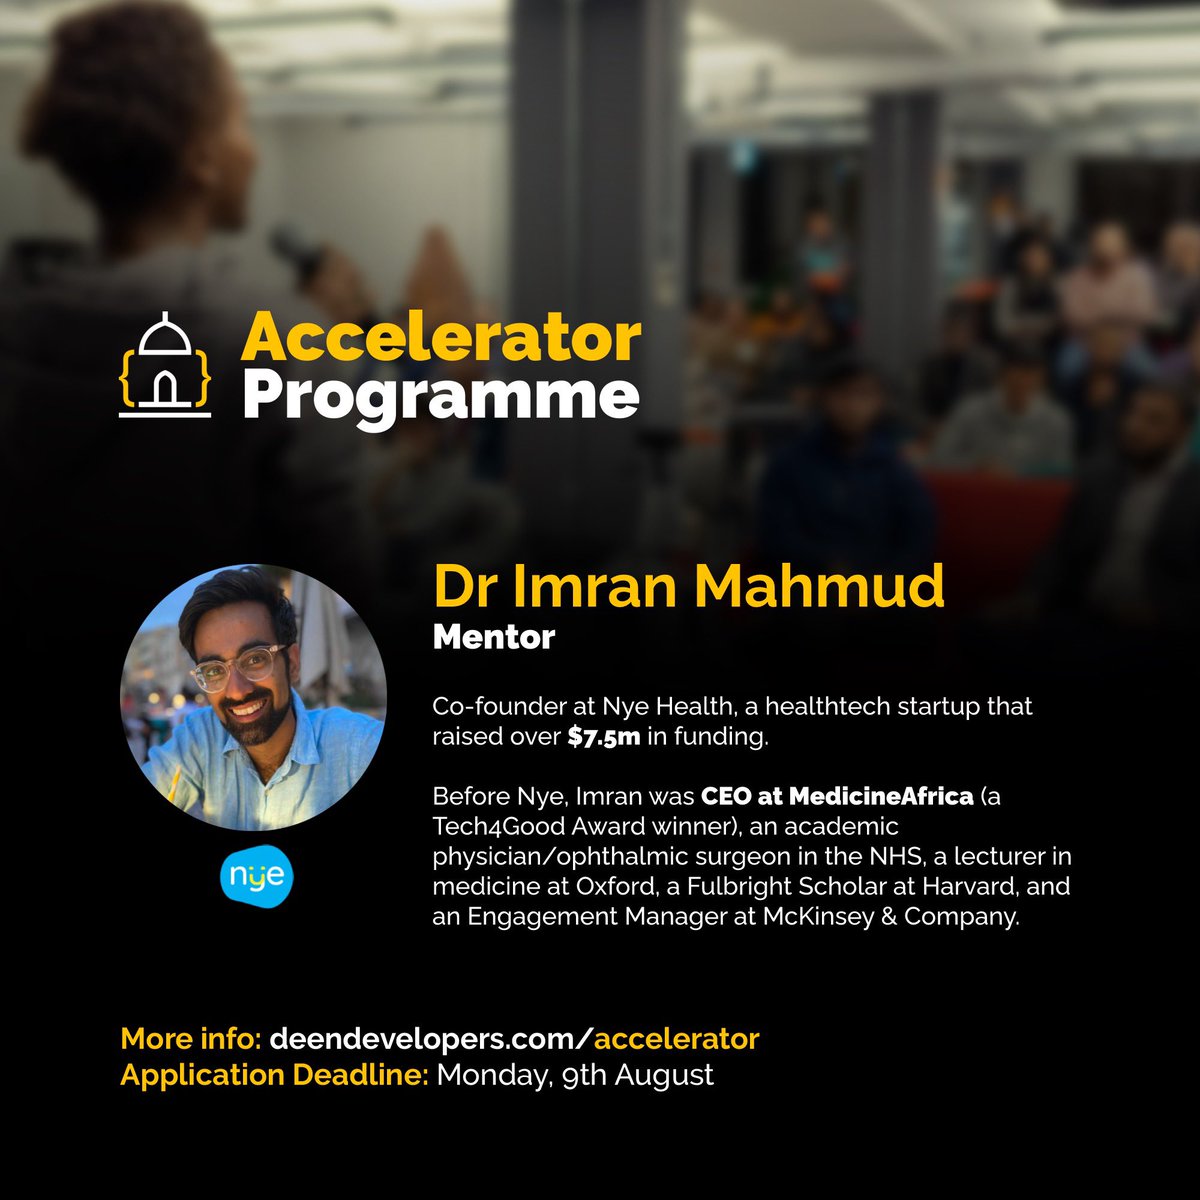 #MeetTheMentors continues with @ImranMahmudMD who will be supporting the Accelerator Programme 

As a co-founder of Nye Health, Imran has supported the team through 3 VC/Angel funding rounds achieving 10-15% weekly growth of the platform

Apply now at deendevelopers.com/accelerator